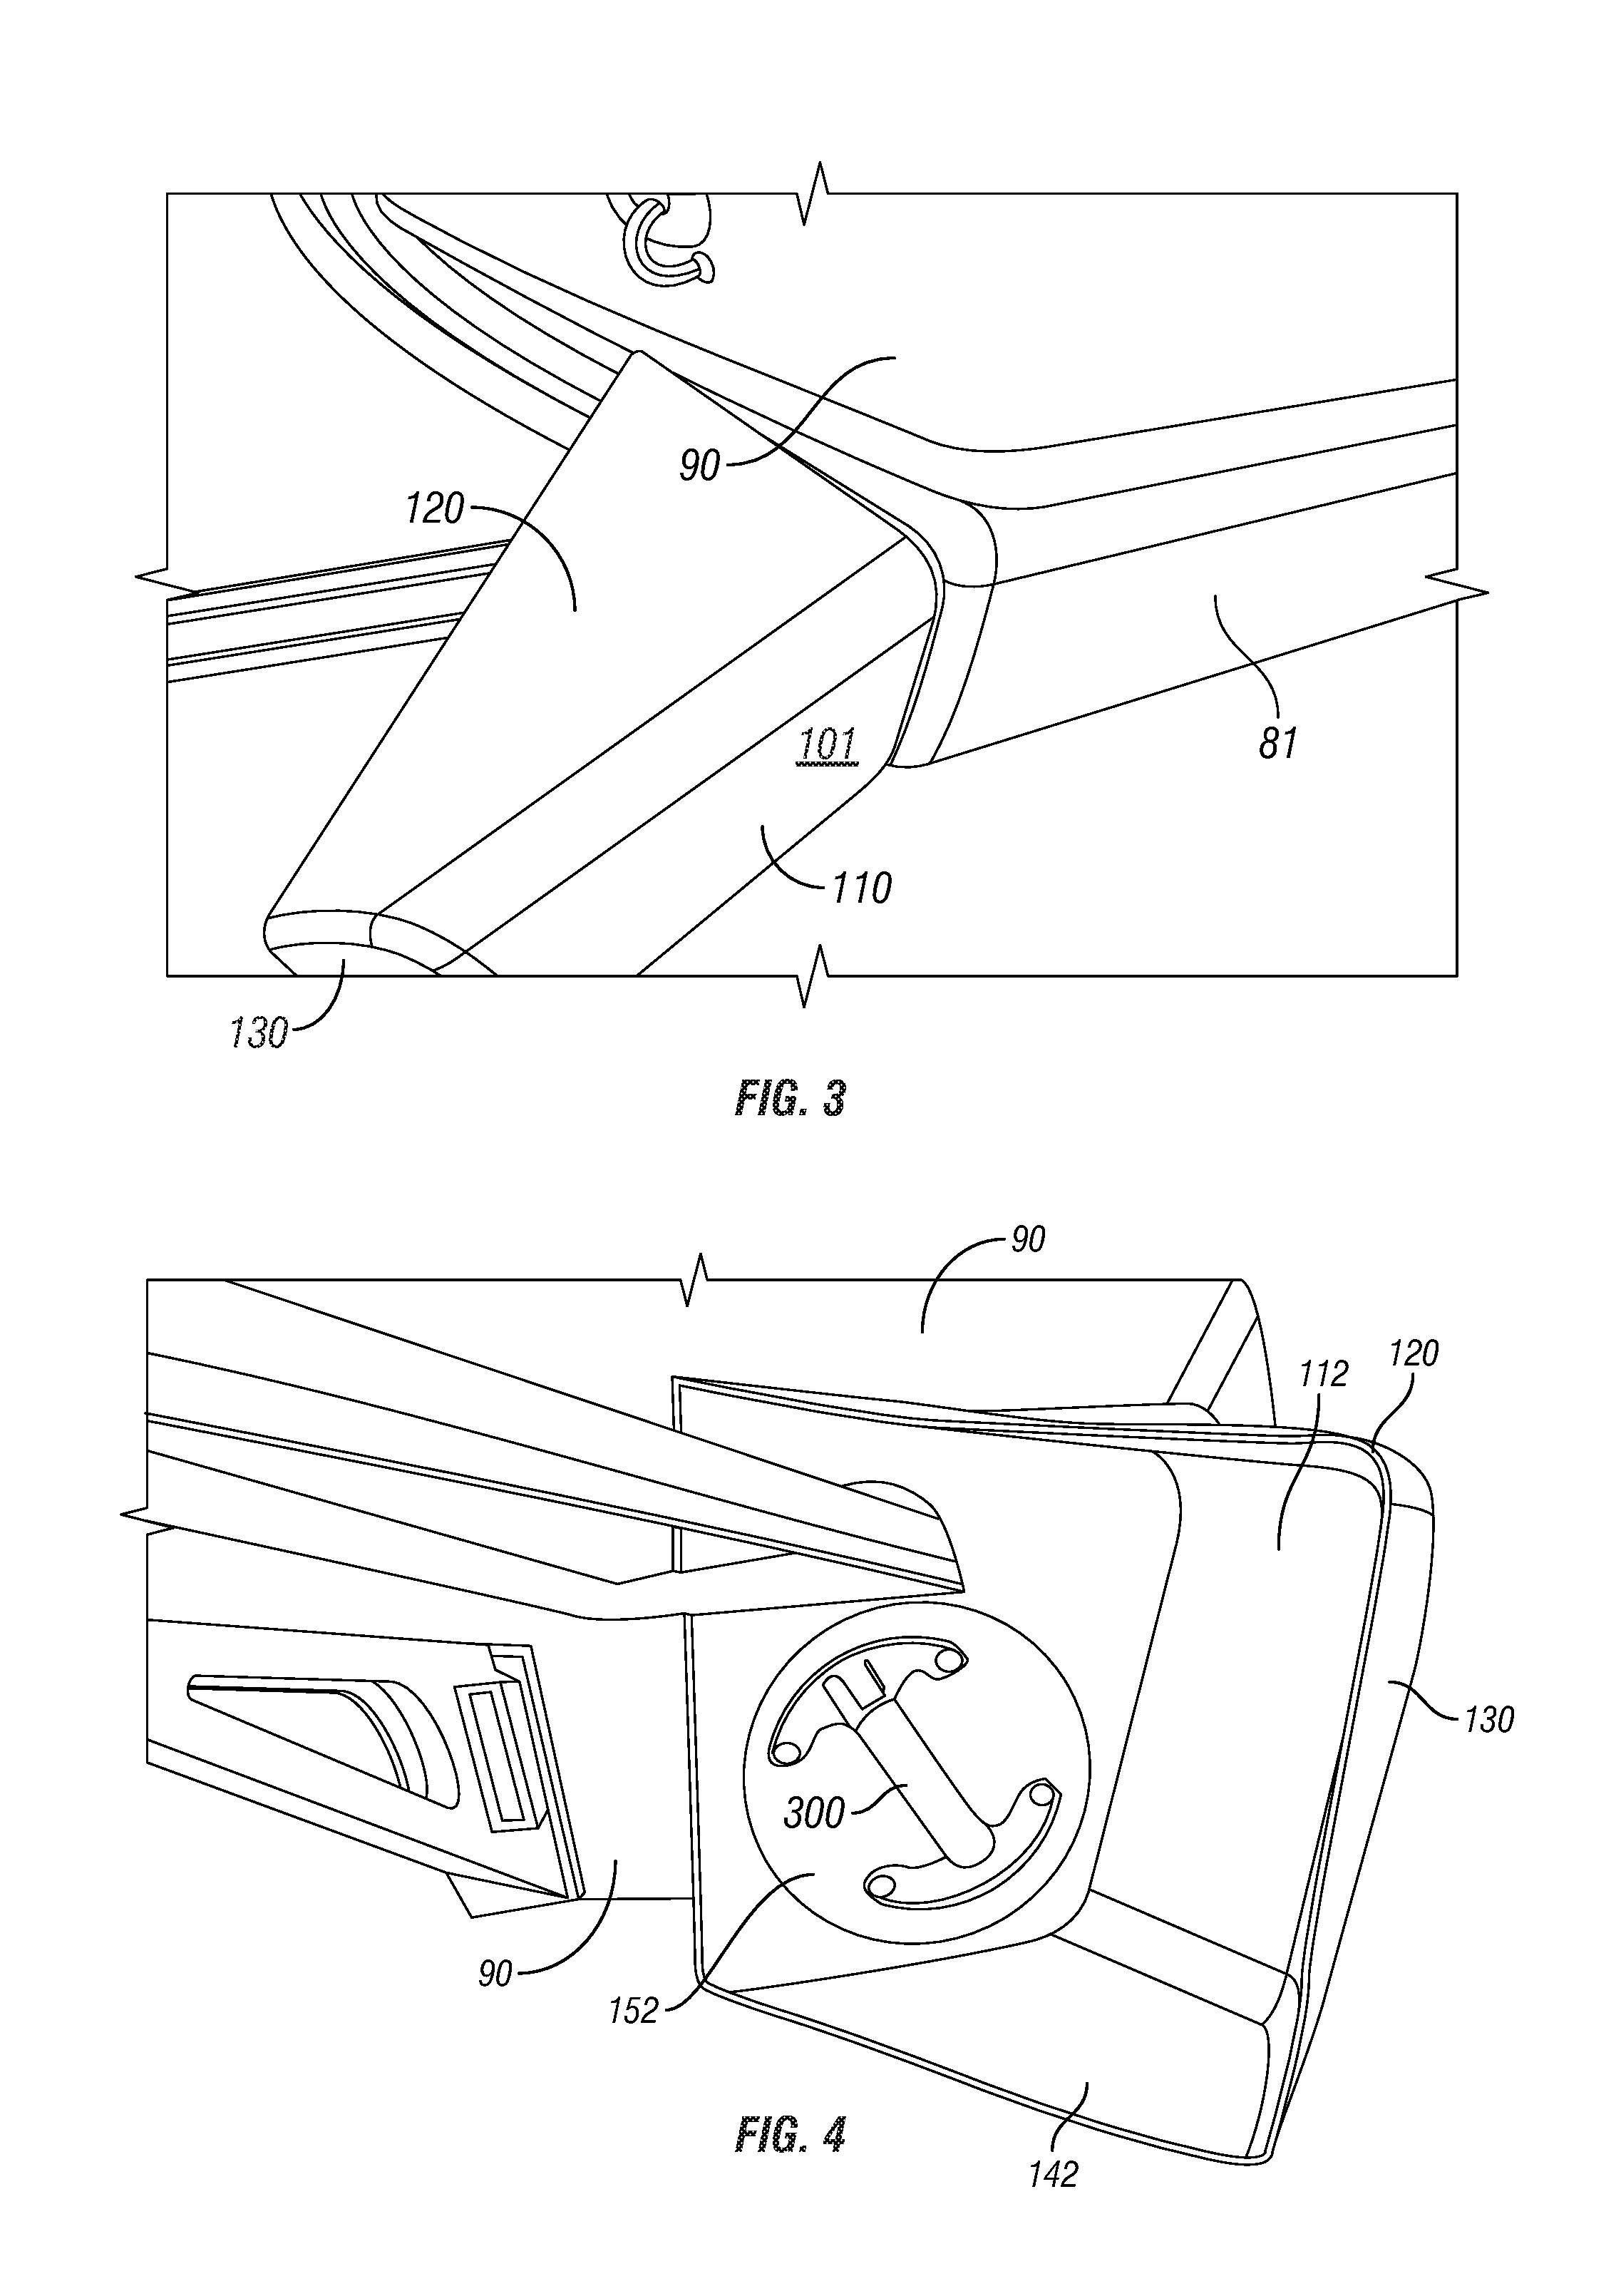 Apparatus and method for wave shaping